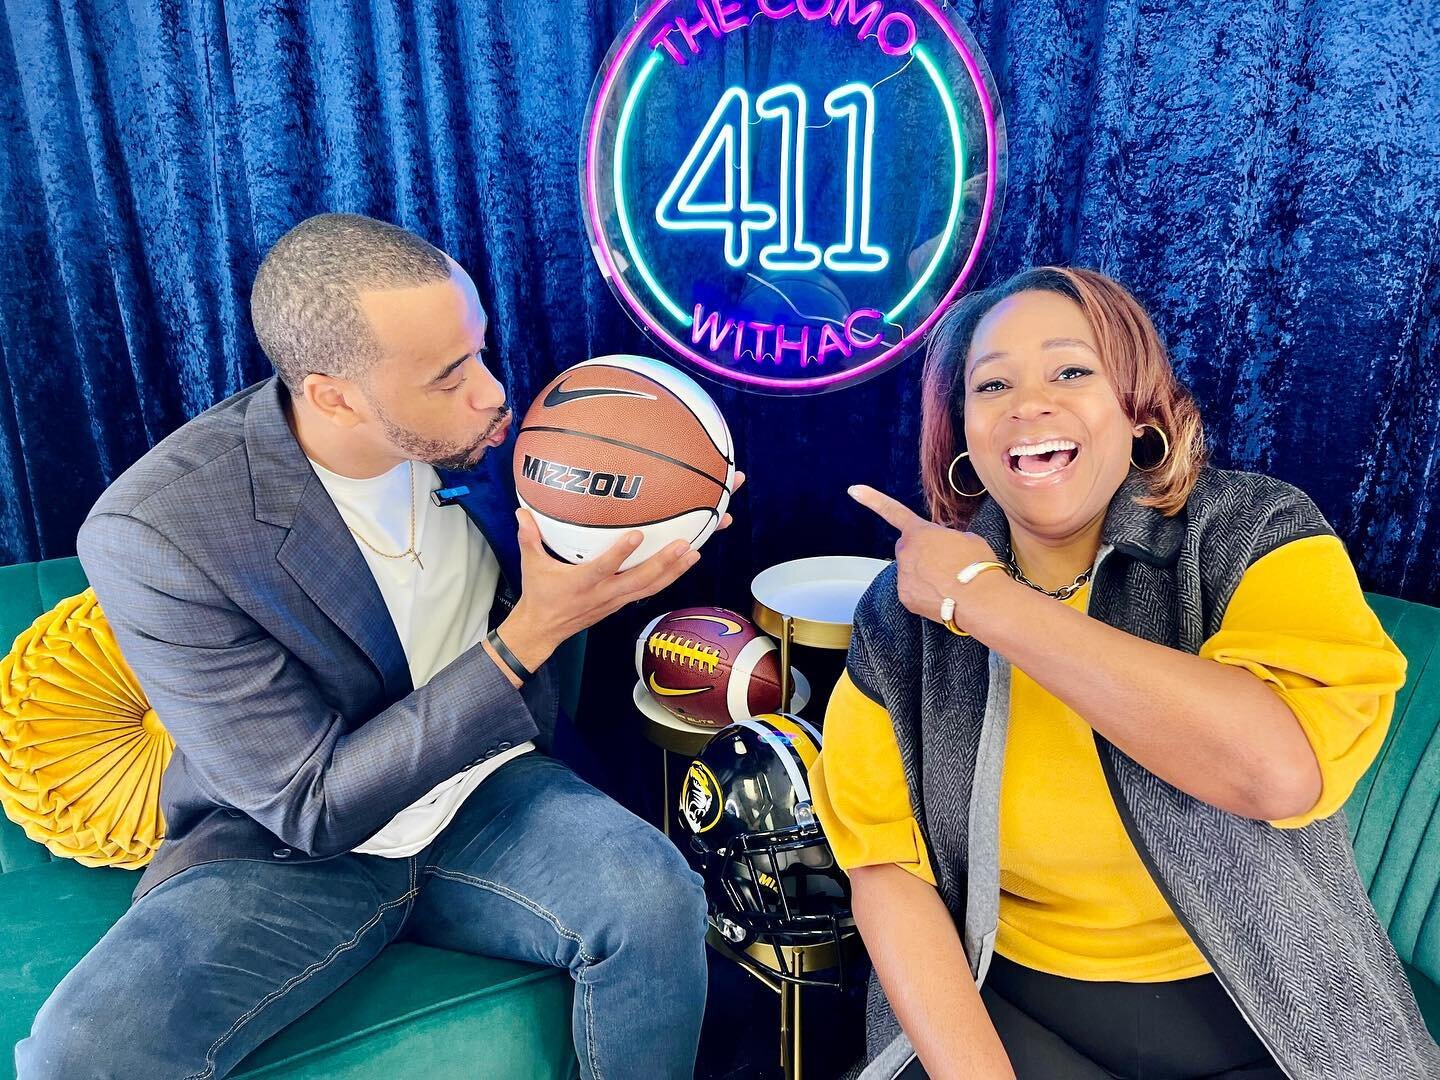 🤩WOW! 🎥We filmed our FIRST in studio interview in our 🚨NEW🚨The COMO 411 set at @selfielovecomo  We had a blast talking with⛹🏾&zwj;♂️ @laurence.bowers about 🐅 @everytruetiger Foundation where we learned a LOT that we didn&rsquo;t know! You&rsquo